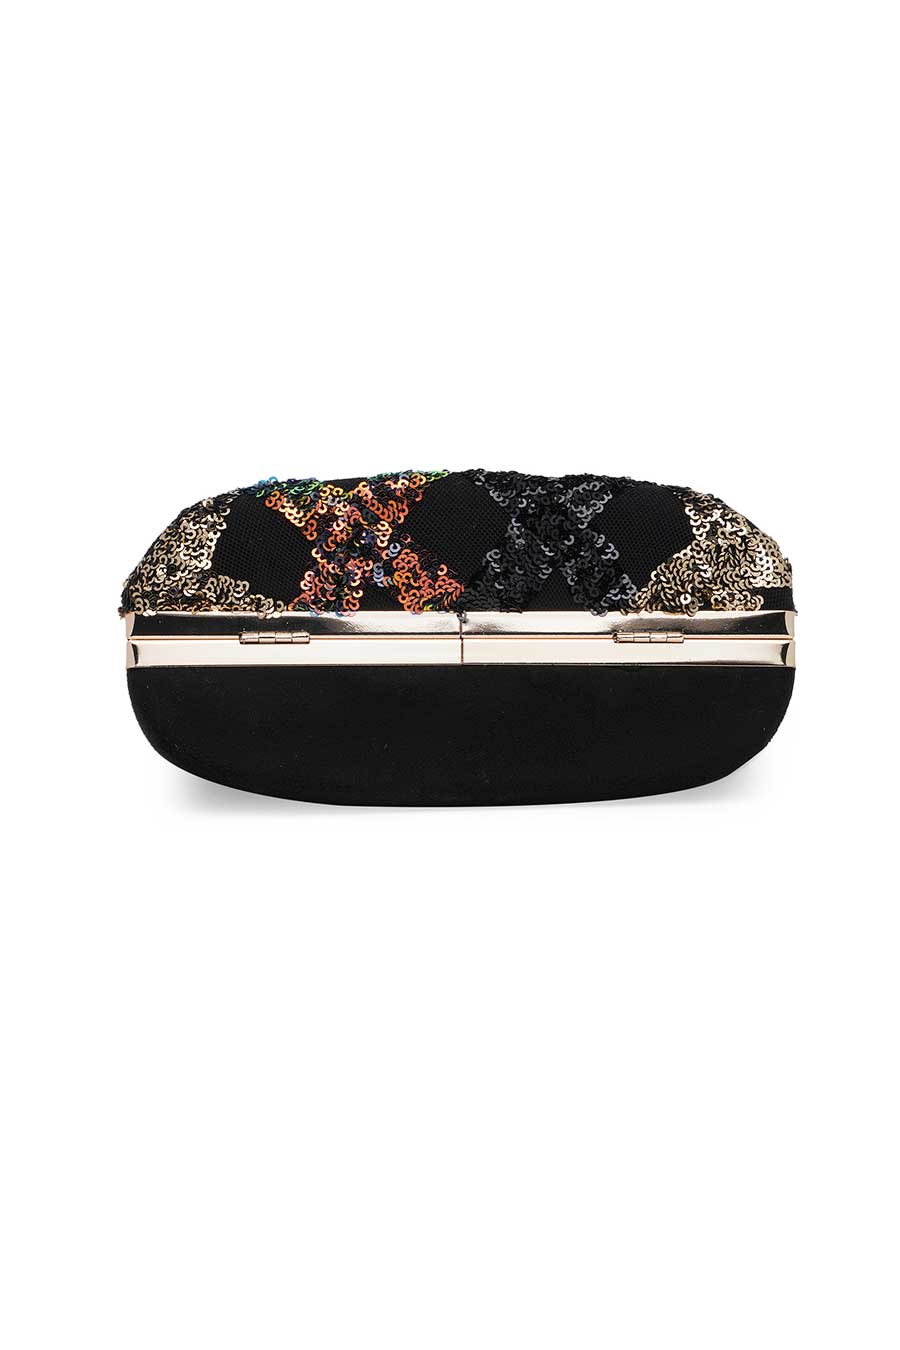 Black Embroidered Purse Style Clutch